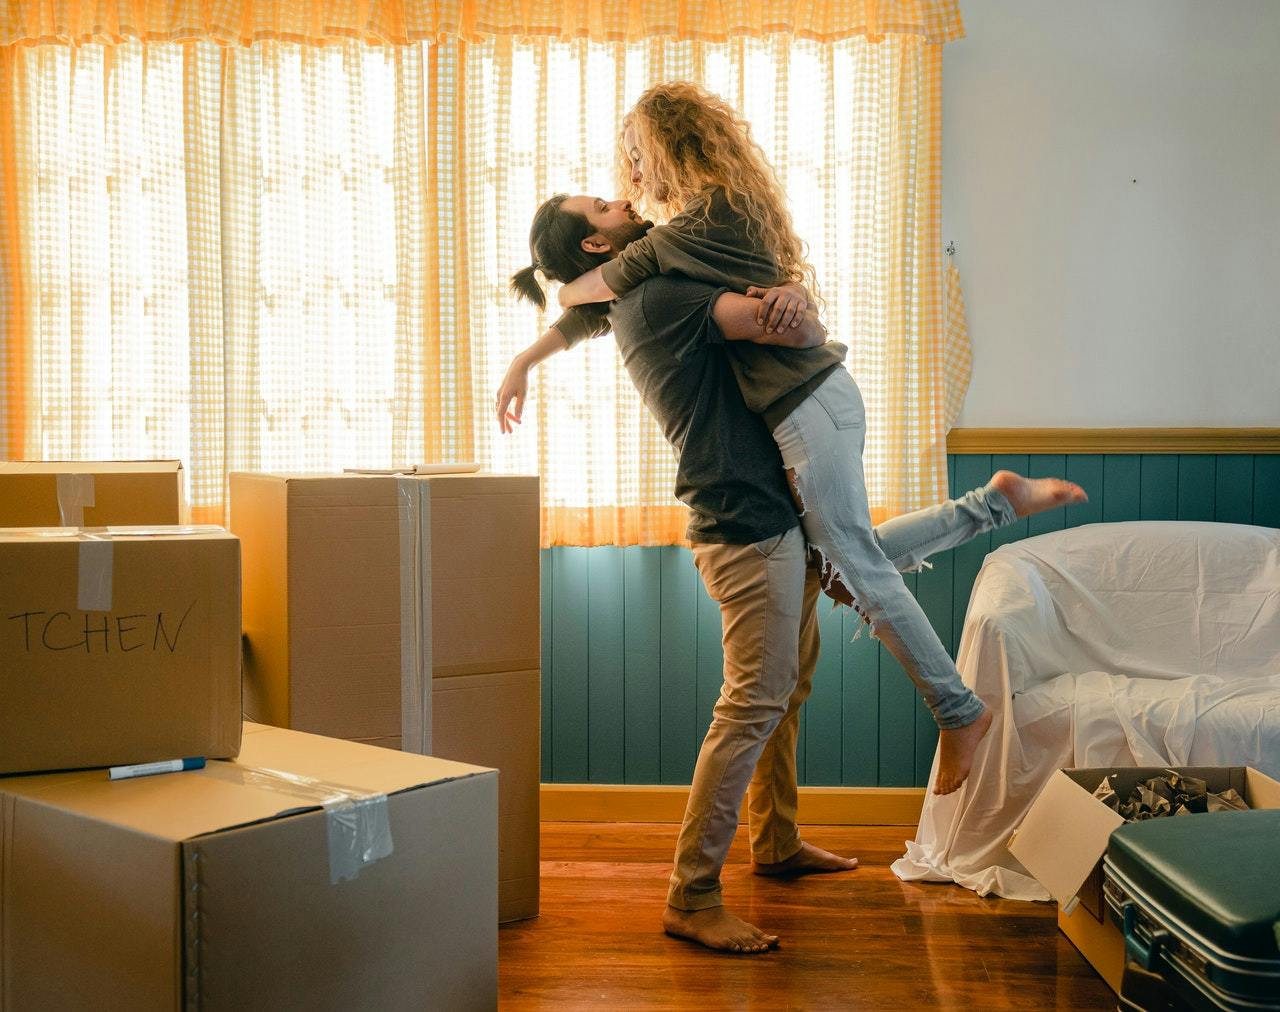 Man and woman hug each in a living room filled with packed moving boxes.